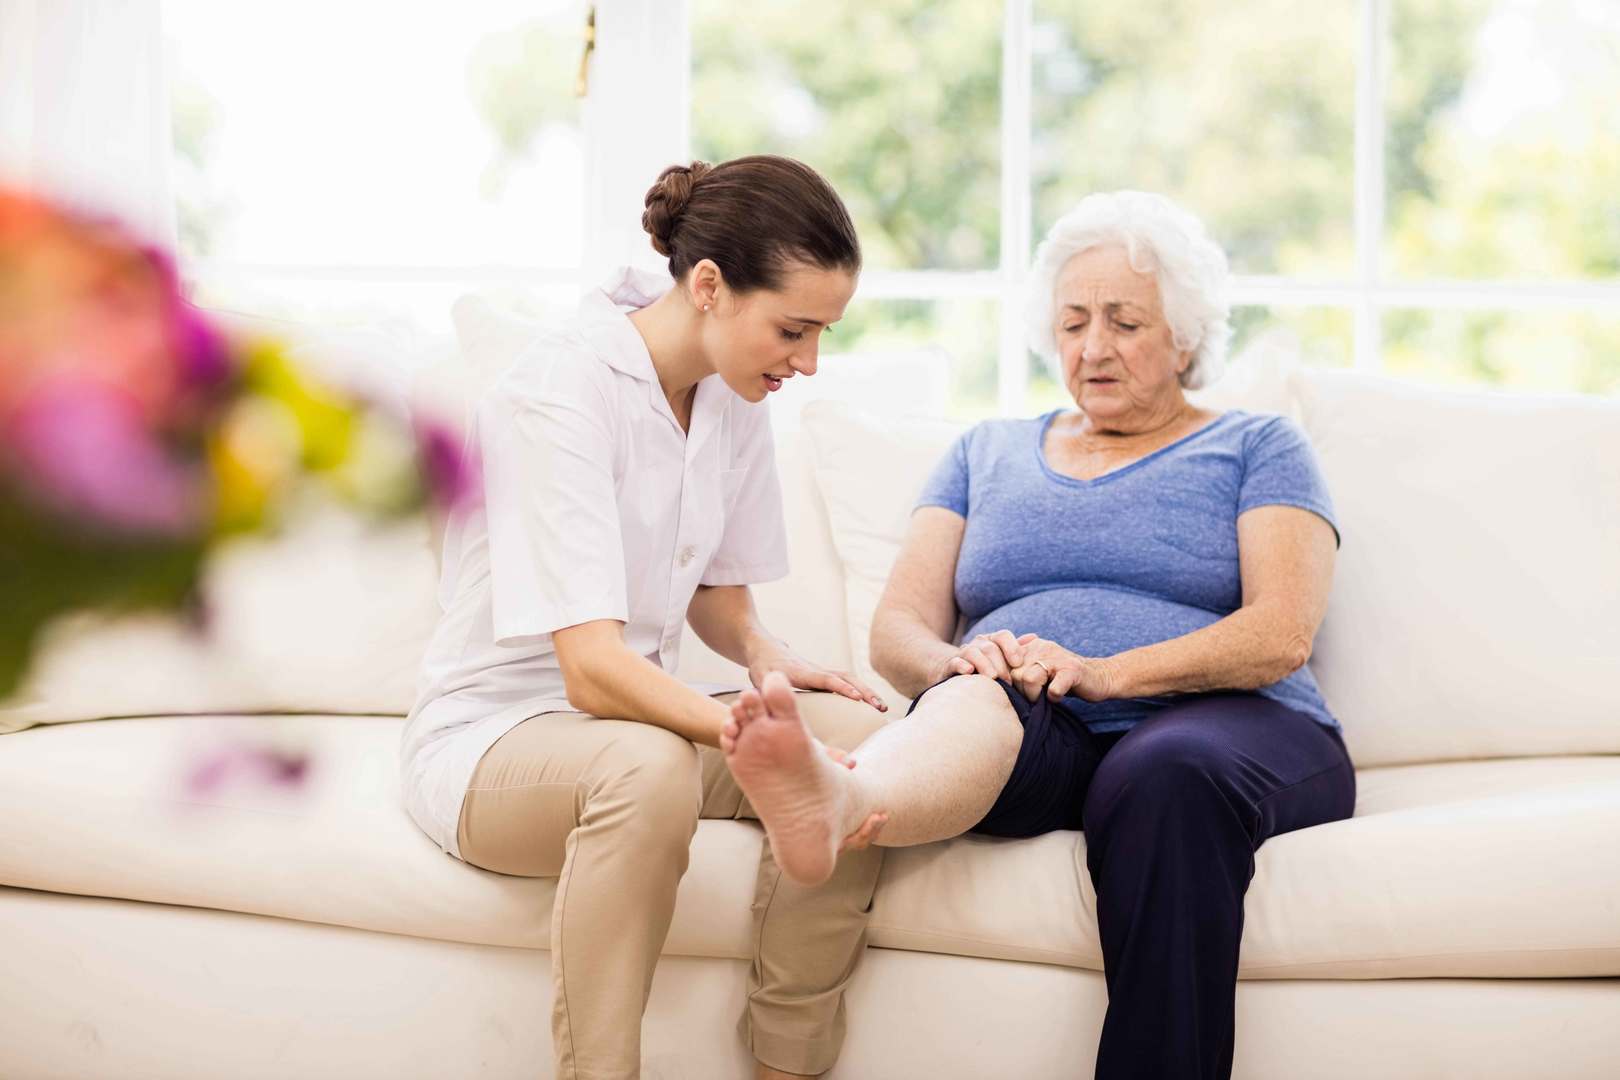 A chiropodic nurse cares for a senior seated on a couch